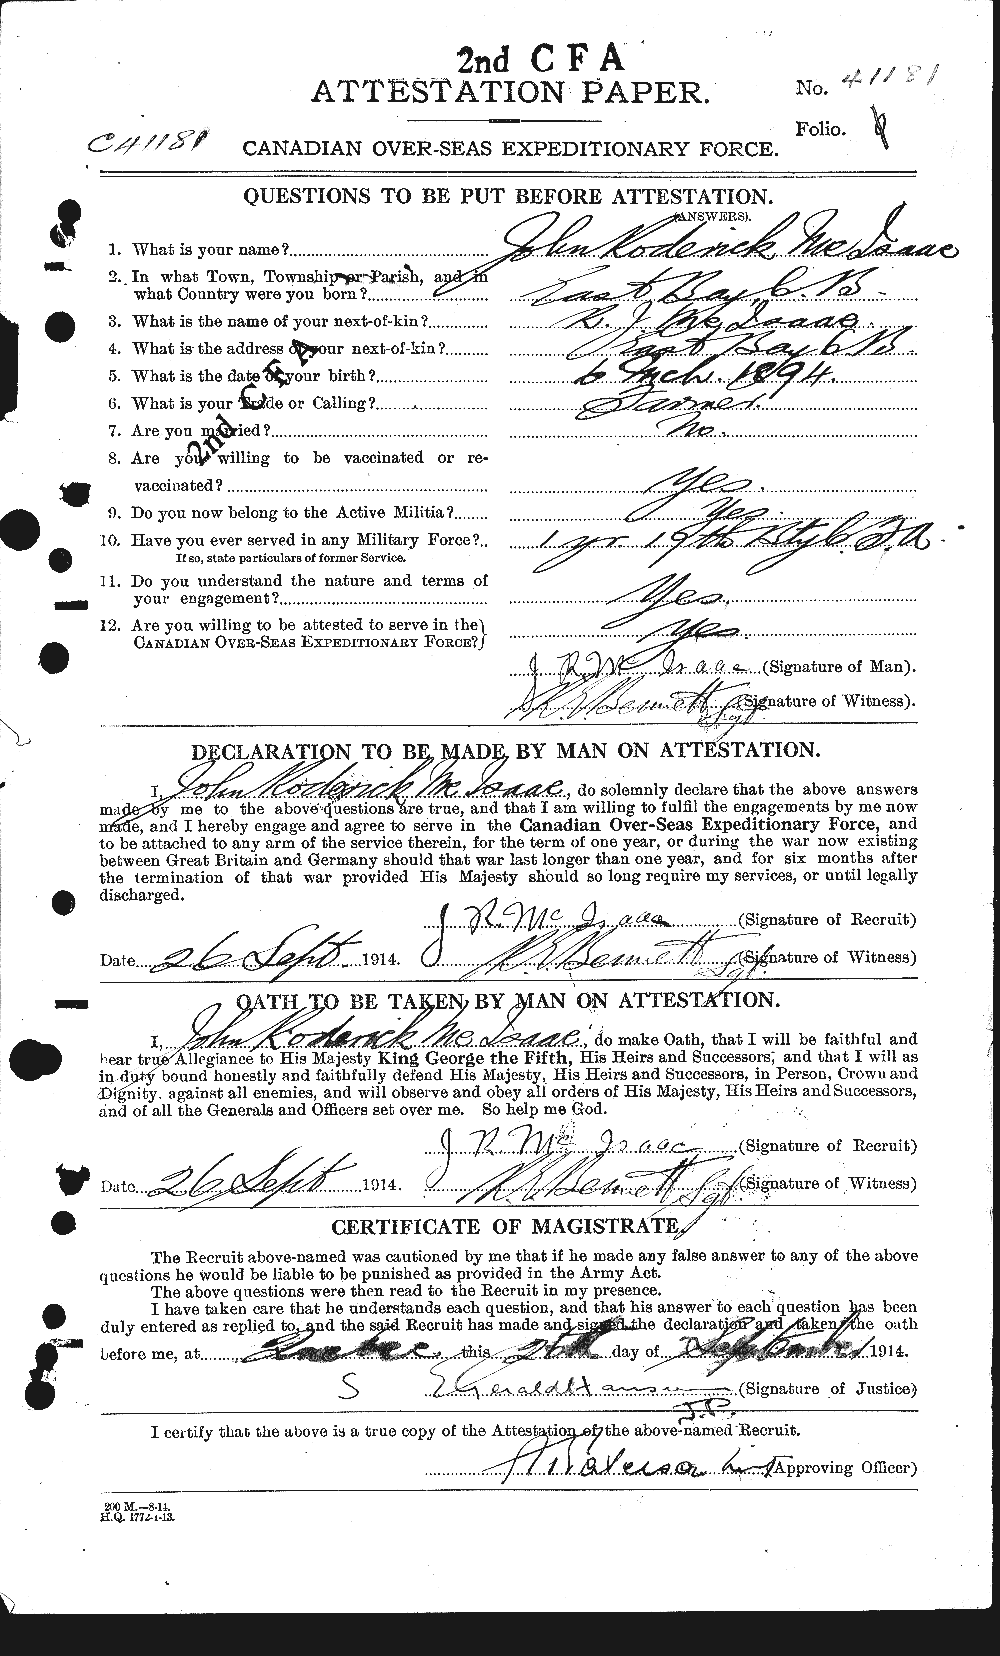 Personnel Records of the First World War - CEF 527756a